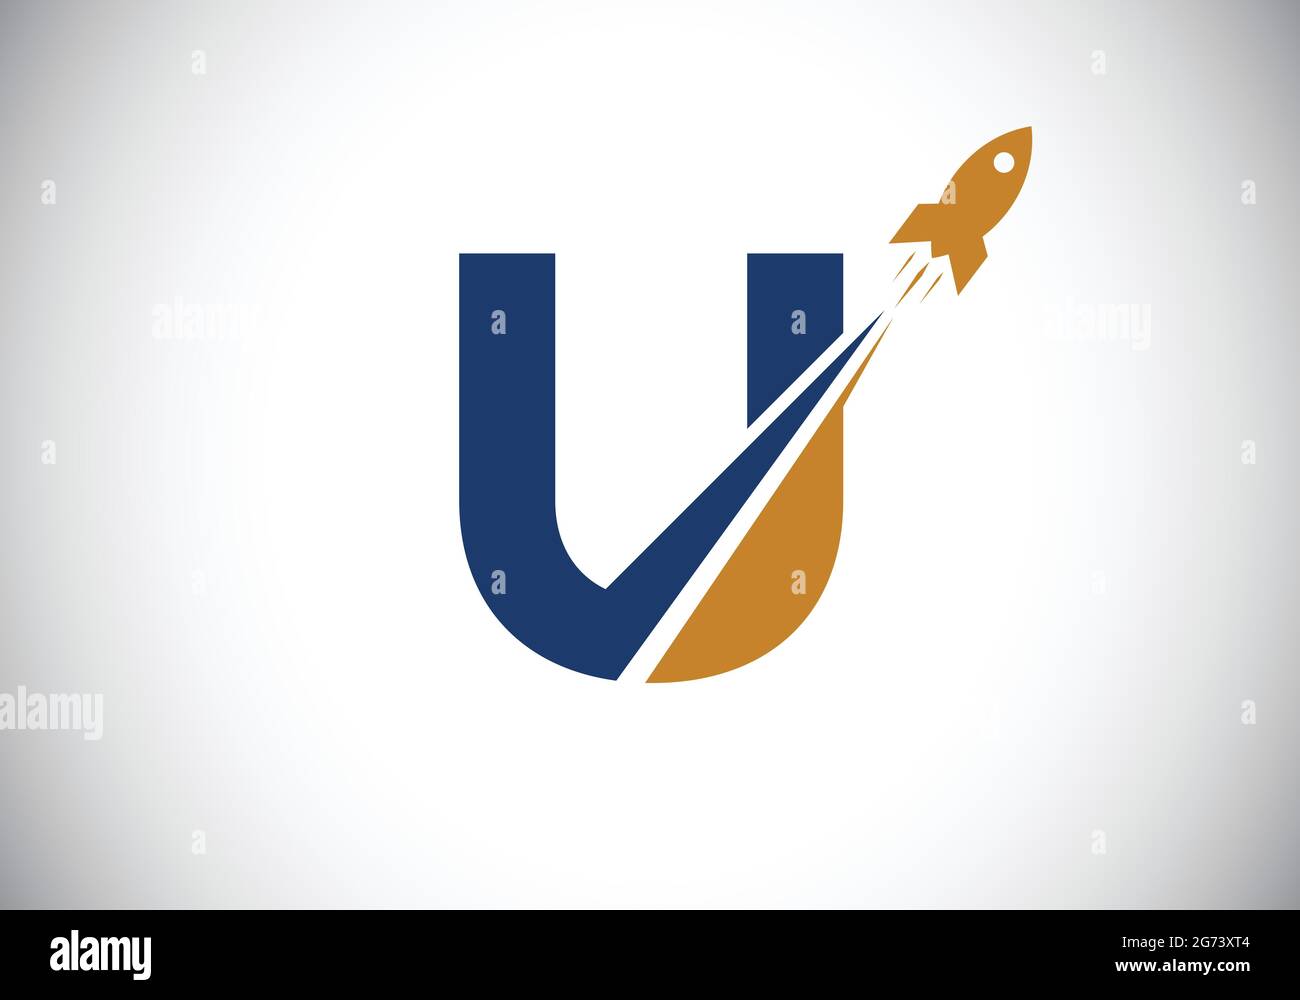 Initial U monogram letter alphabet with a Rocket logo design. Rocket icon. Font emblem. Modern vector logotype for business and company identity. Stock Vector